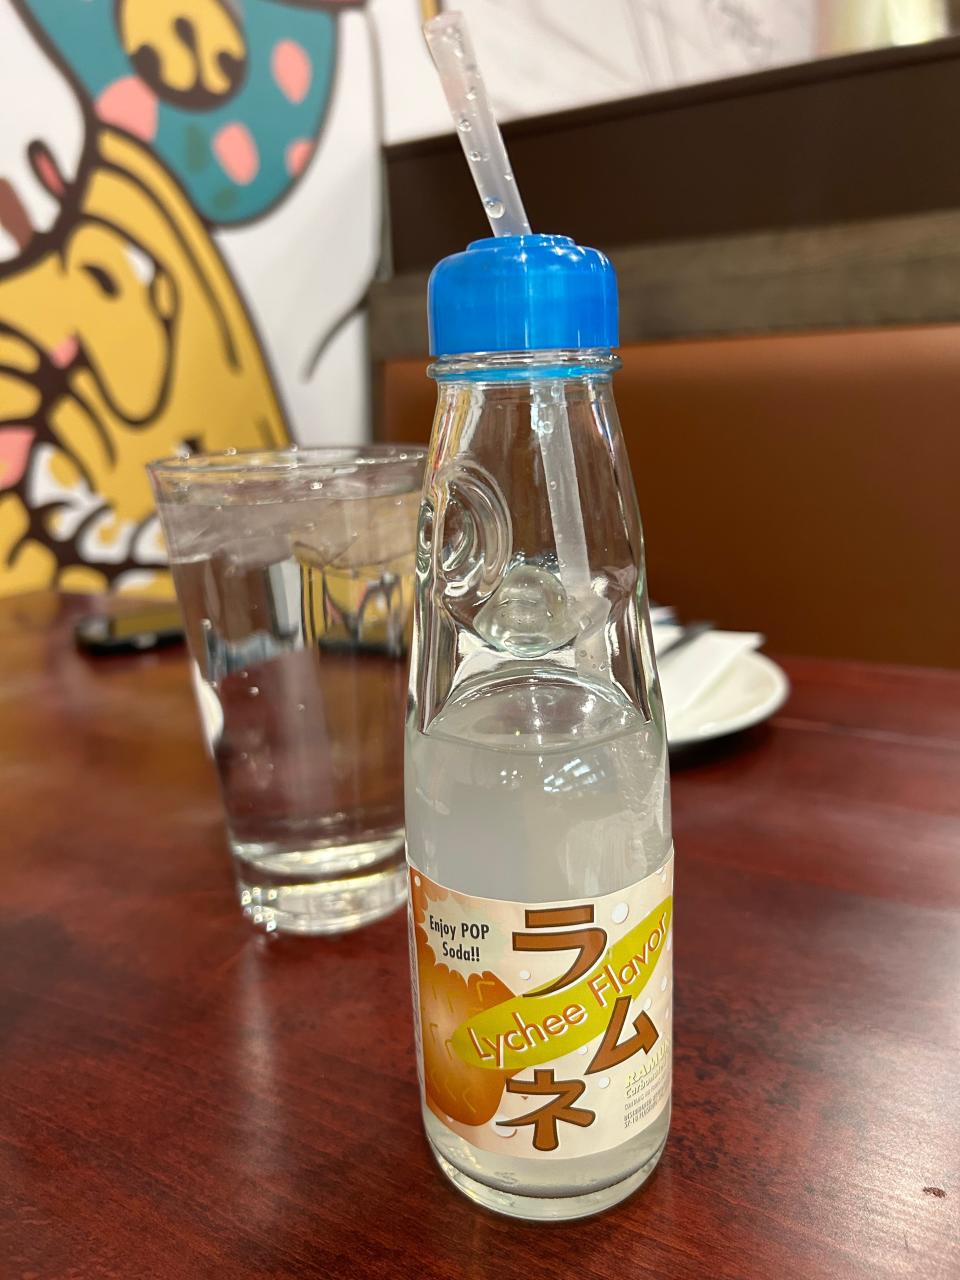 Lychee-flavored Japanese soda has a fun marble in the bottle at Noodle King in Copley.